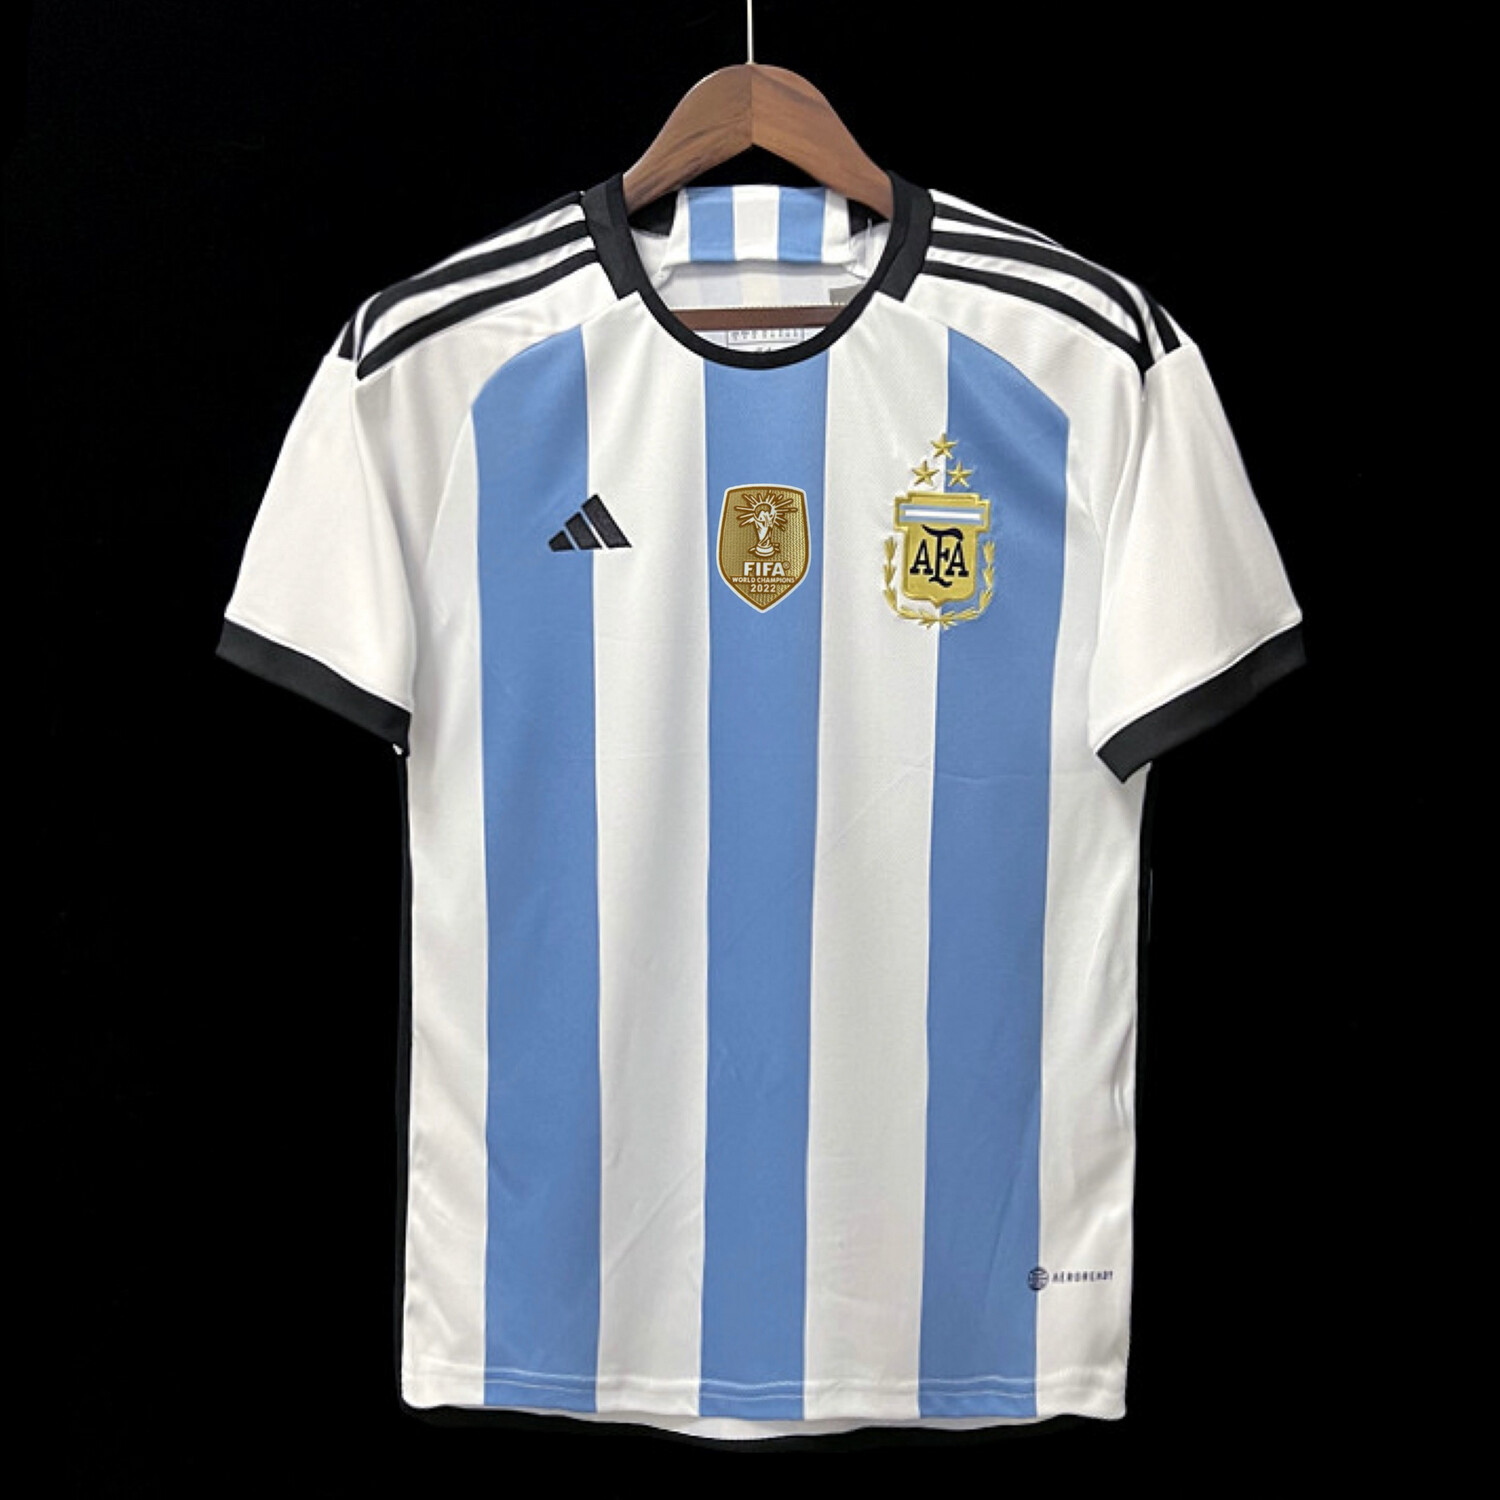 Argentina World Cup Champions Home Shirt